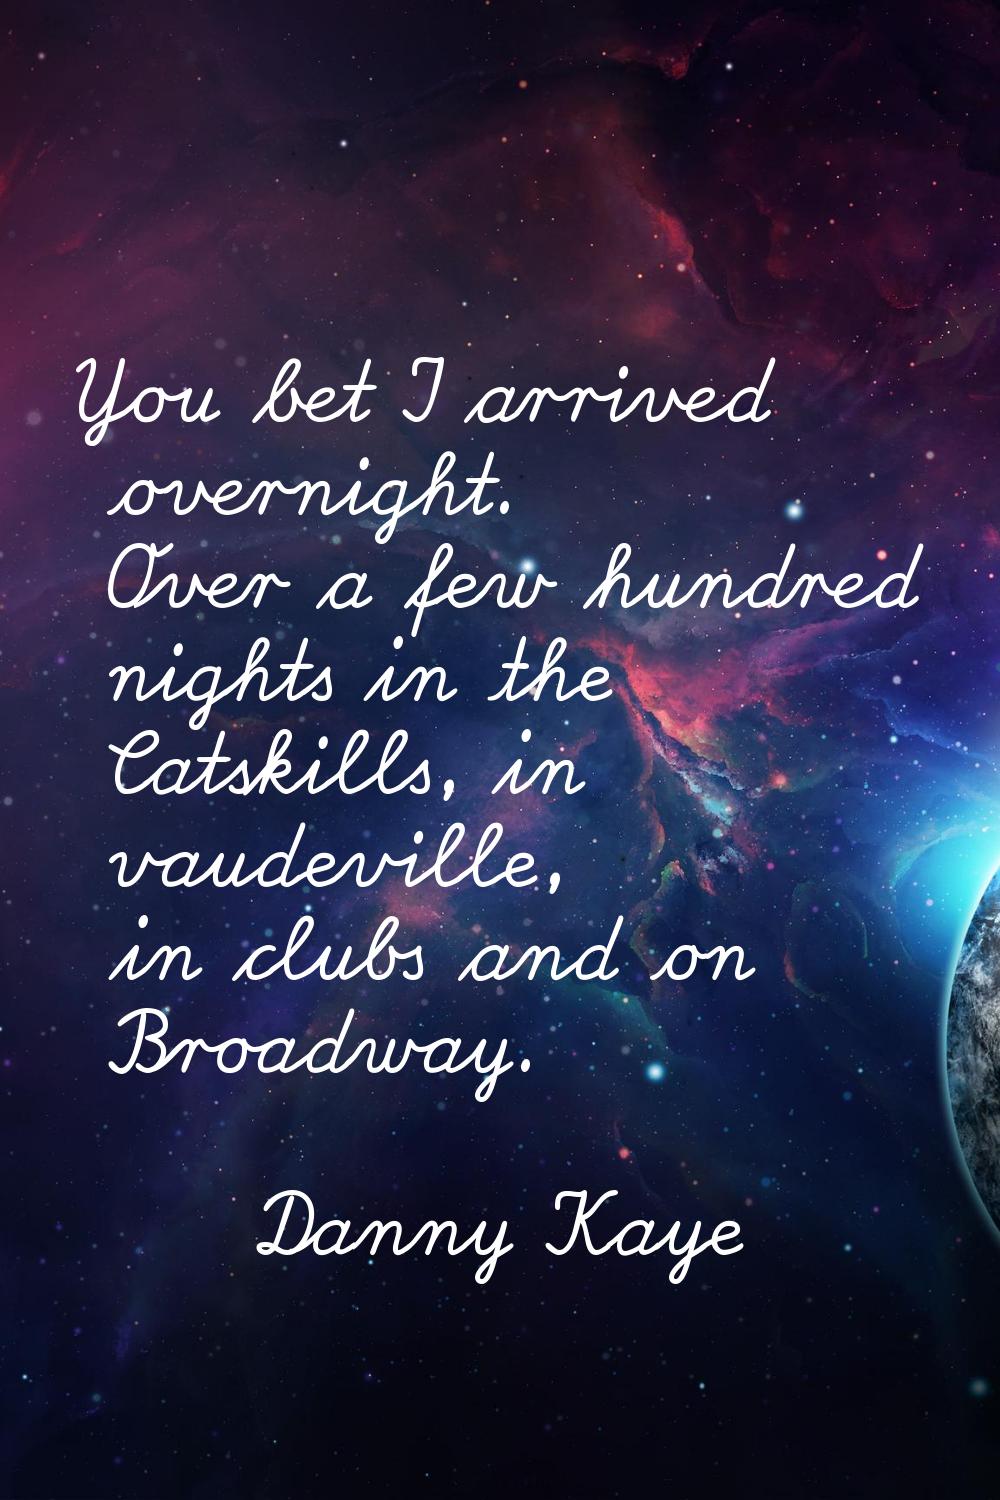 You bet I arrived overnight. Over a few hundred nights in the Catskills, in vaudeville, in clubs an